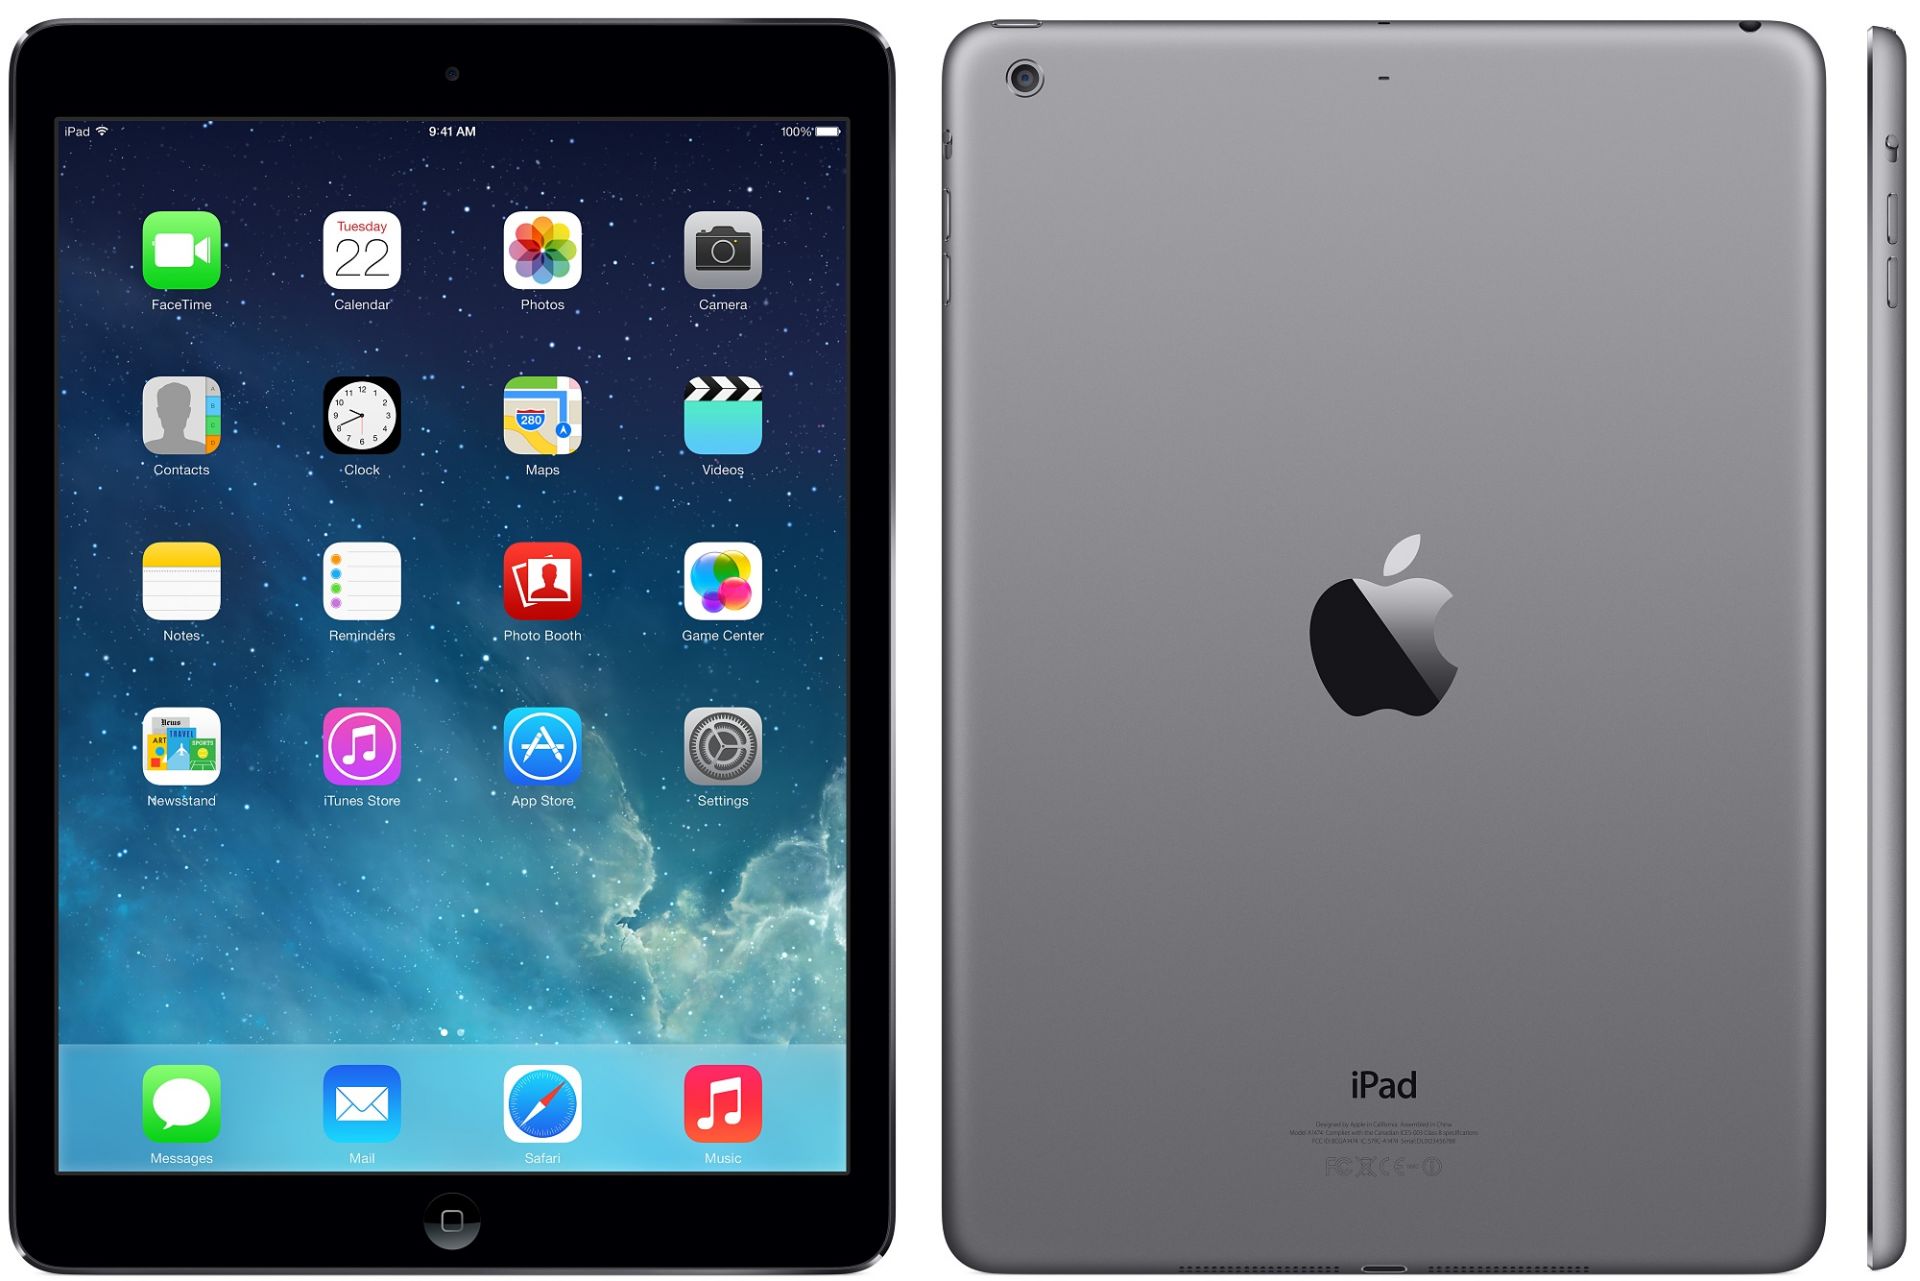 V Grade B Apple Ipad Air 16GB Wi-Fi (Some Models May Be 4G) - Unit only - No Box or Accessories -